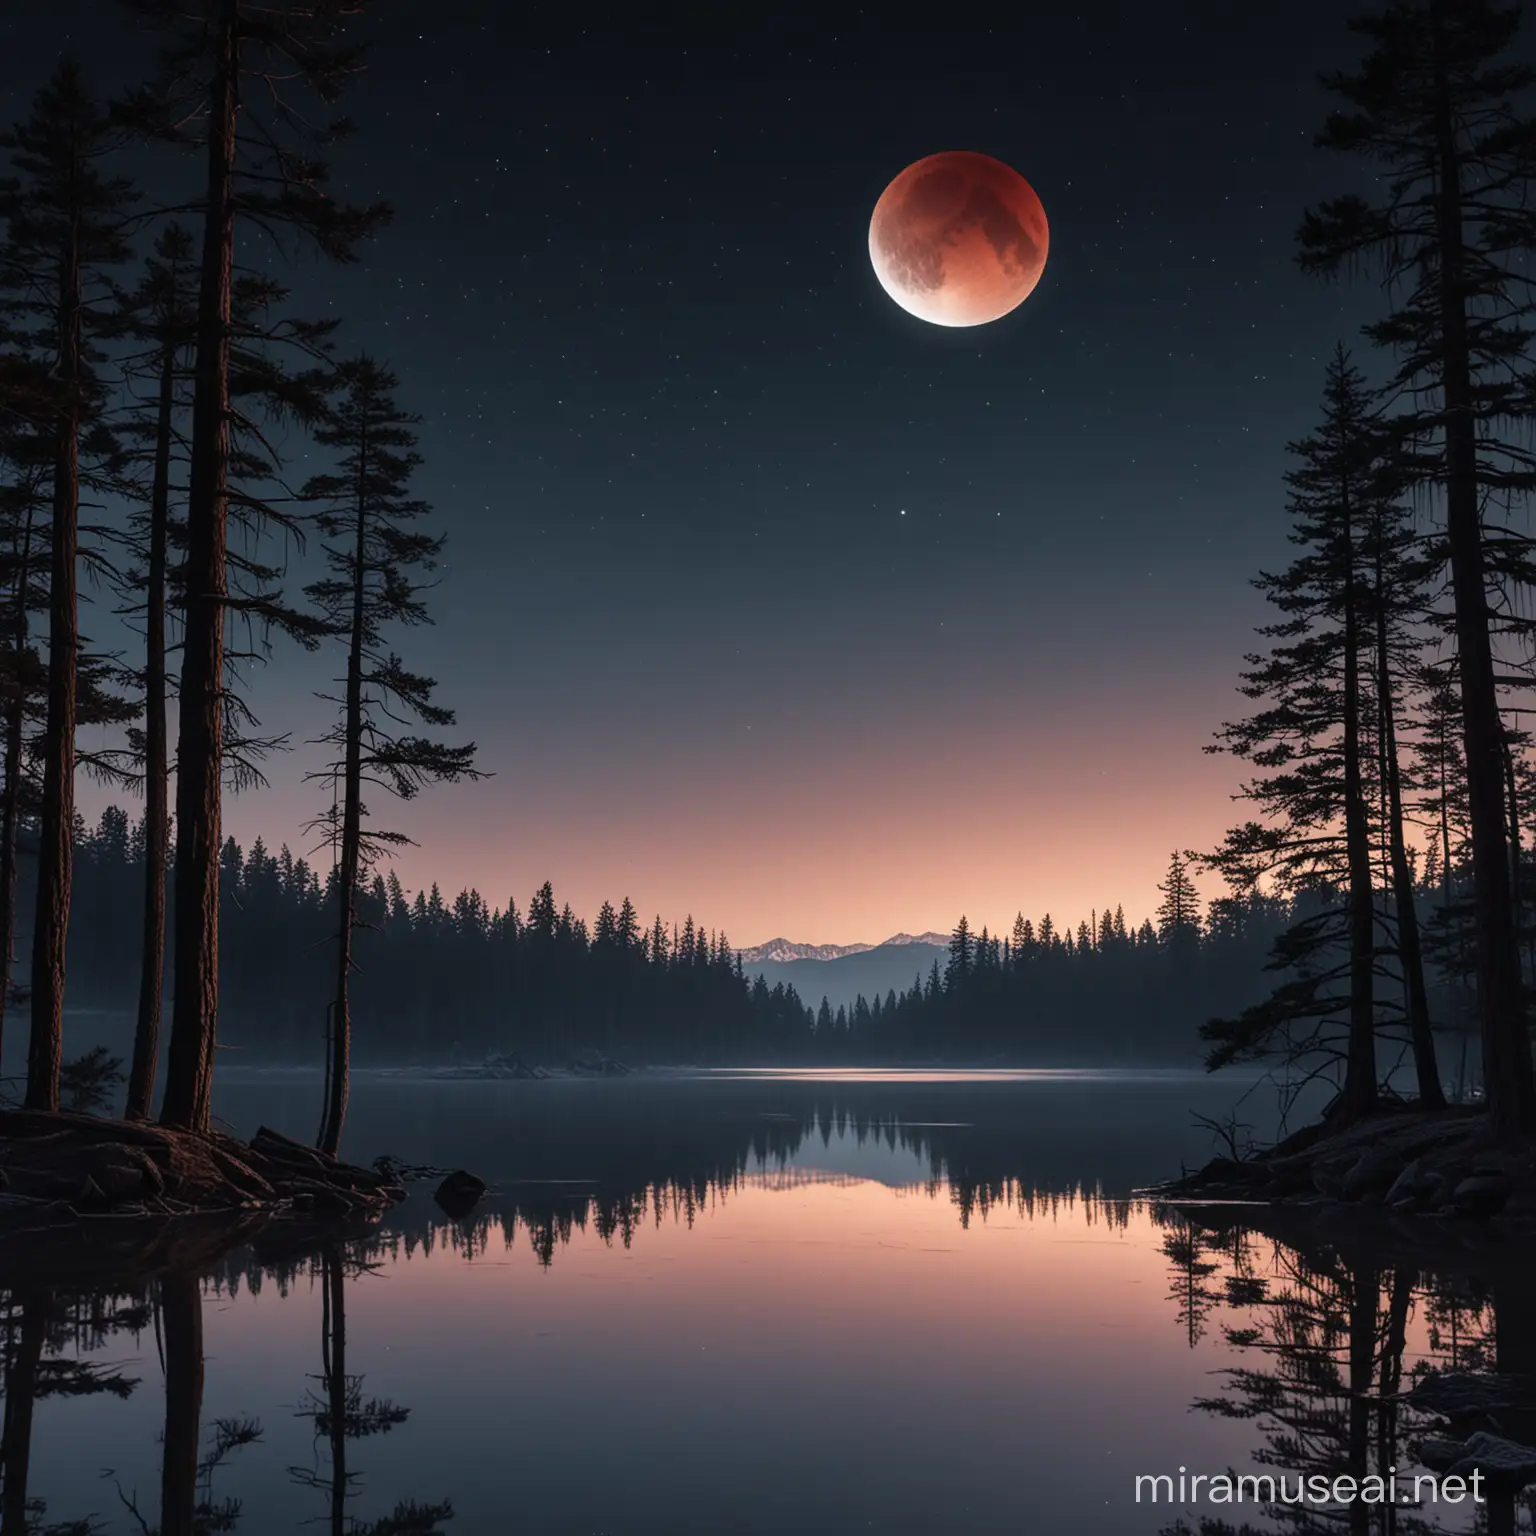 lunar eclipse with scene of lake and pine trees
